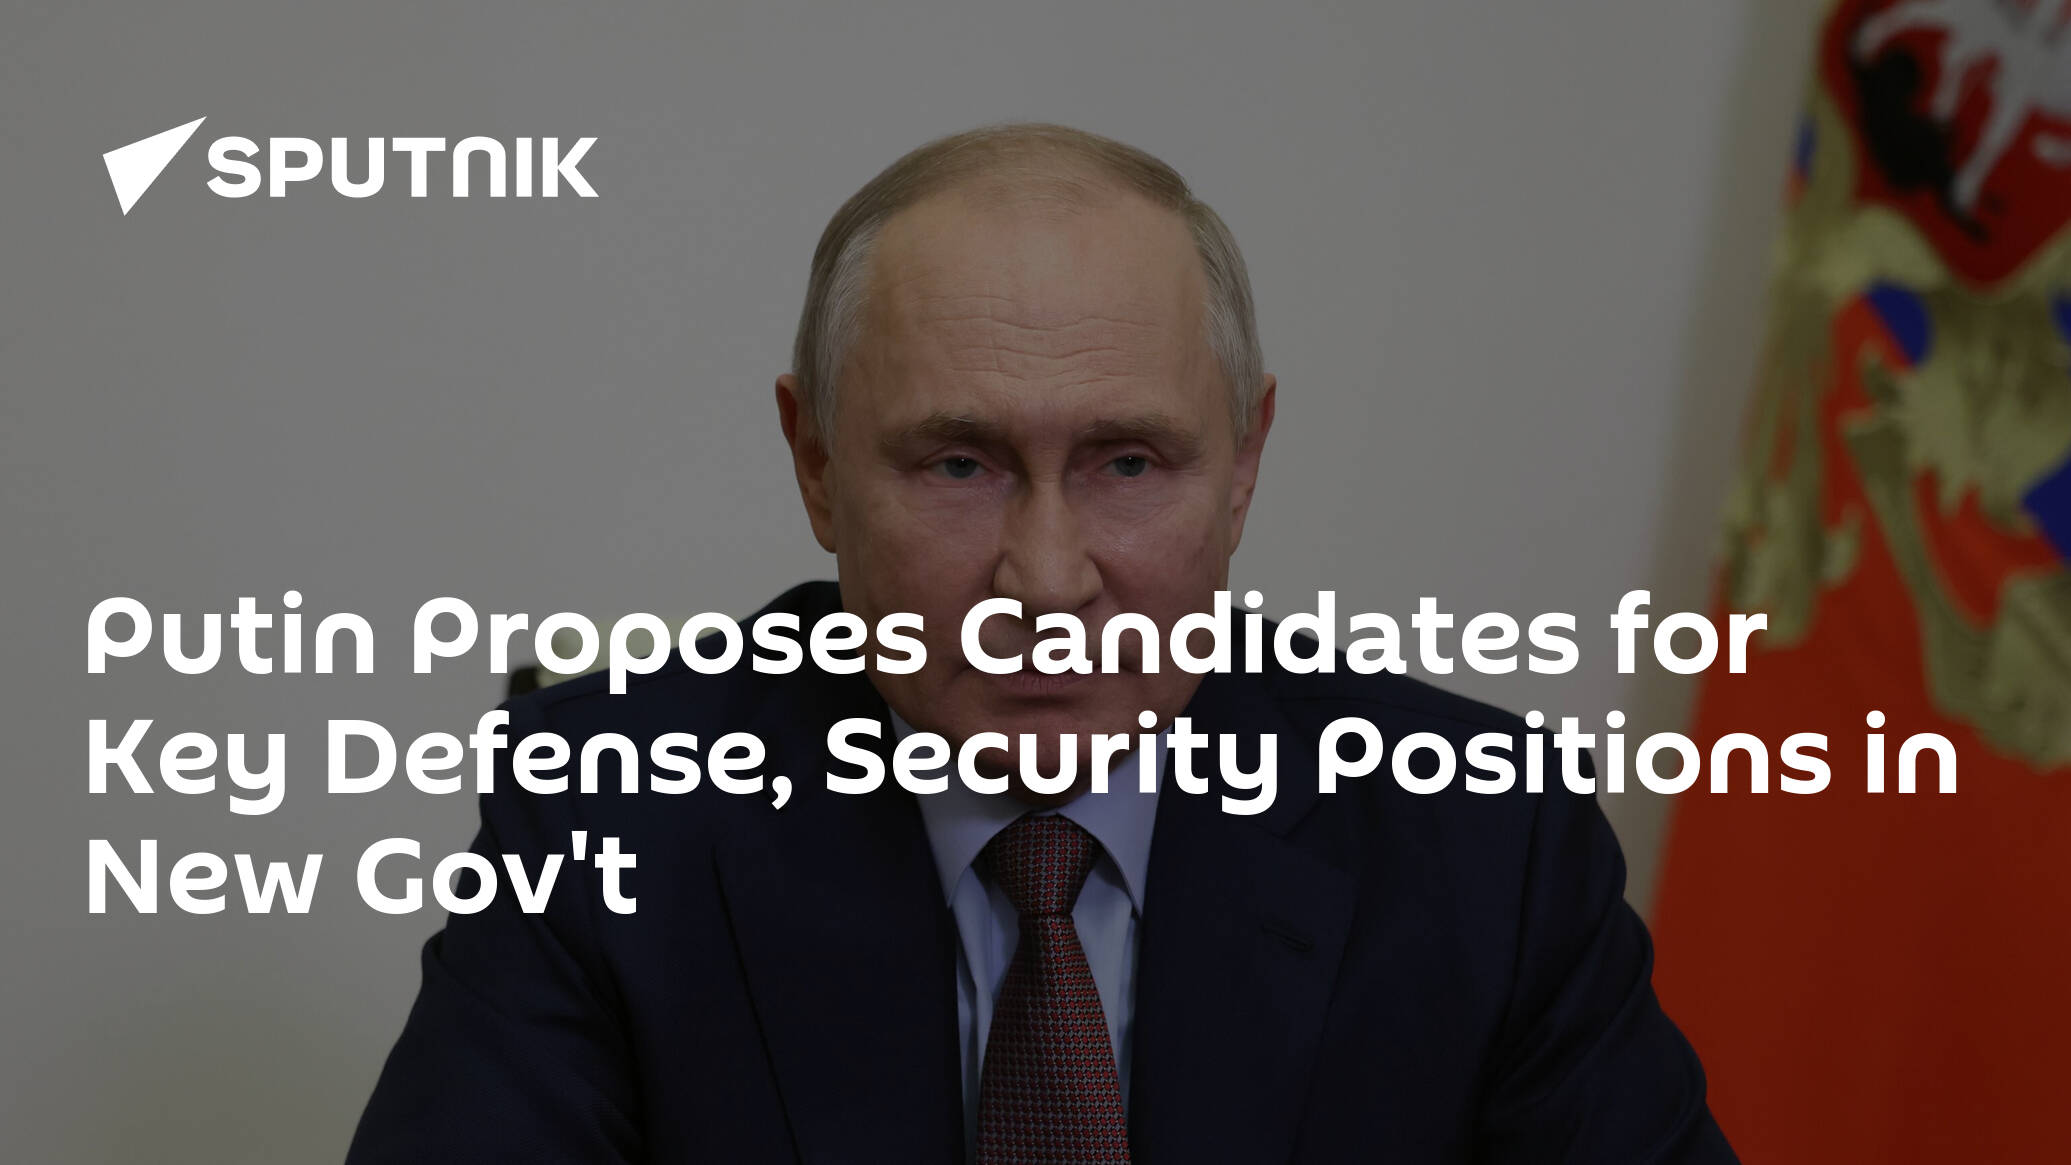 Putin Proposes Candidates for Key Defense, Security Positions in New Gov't